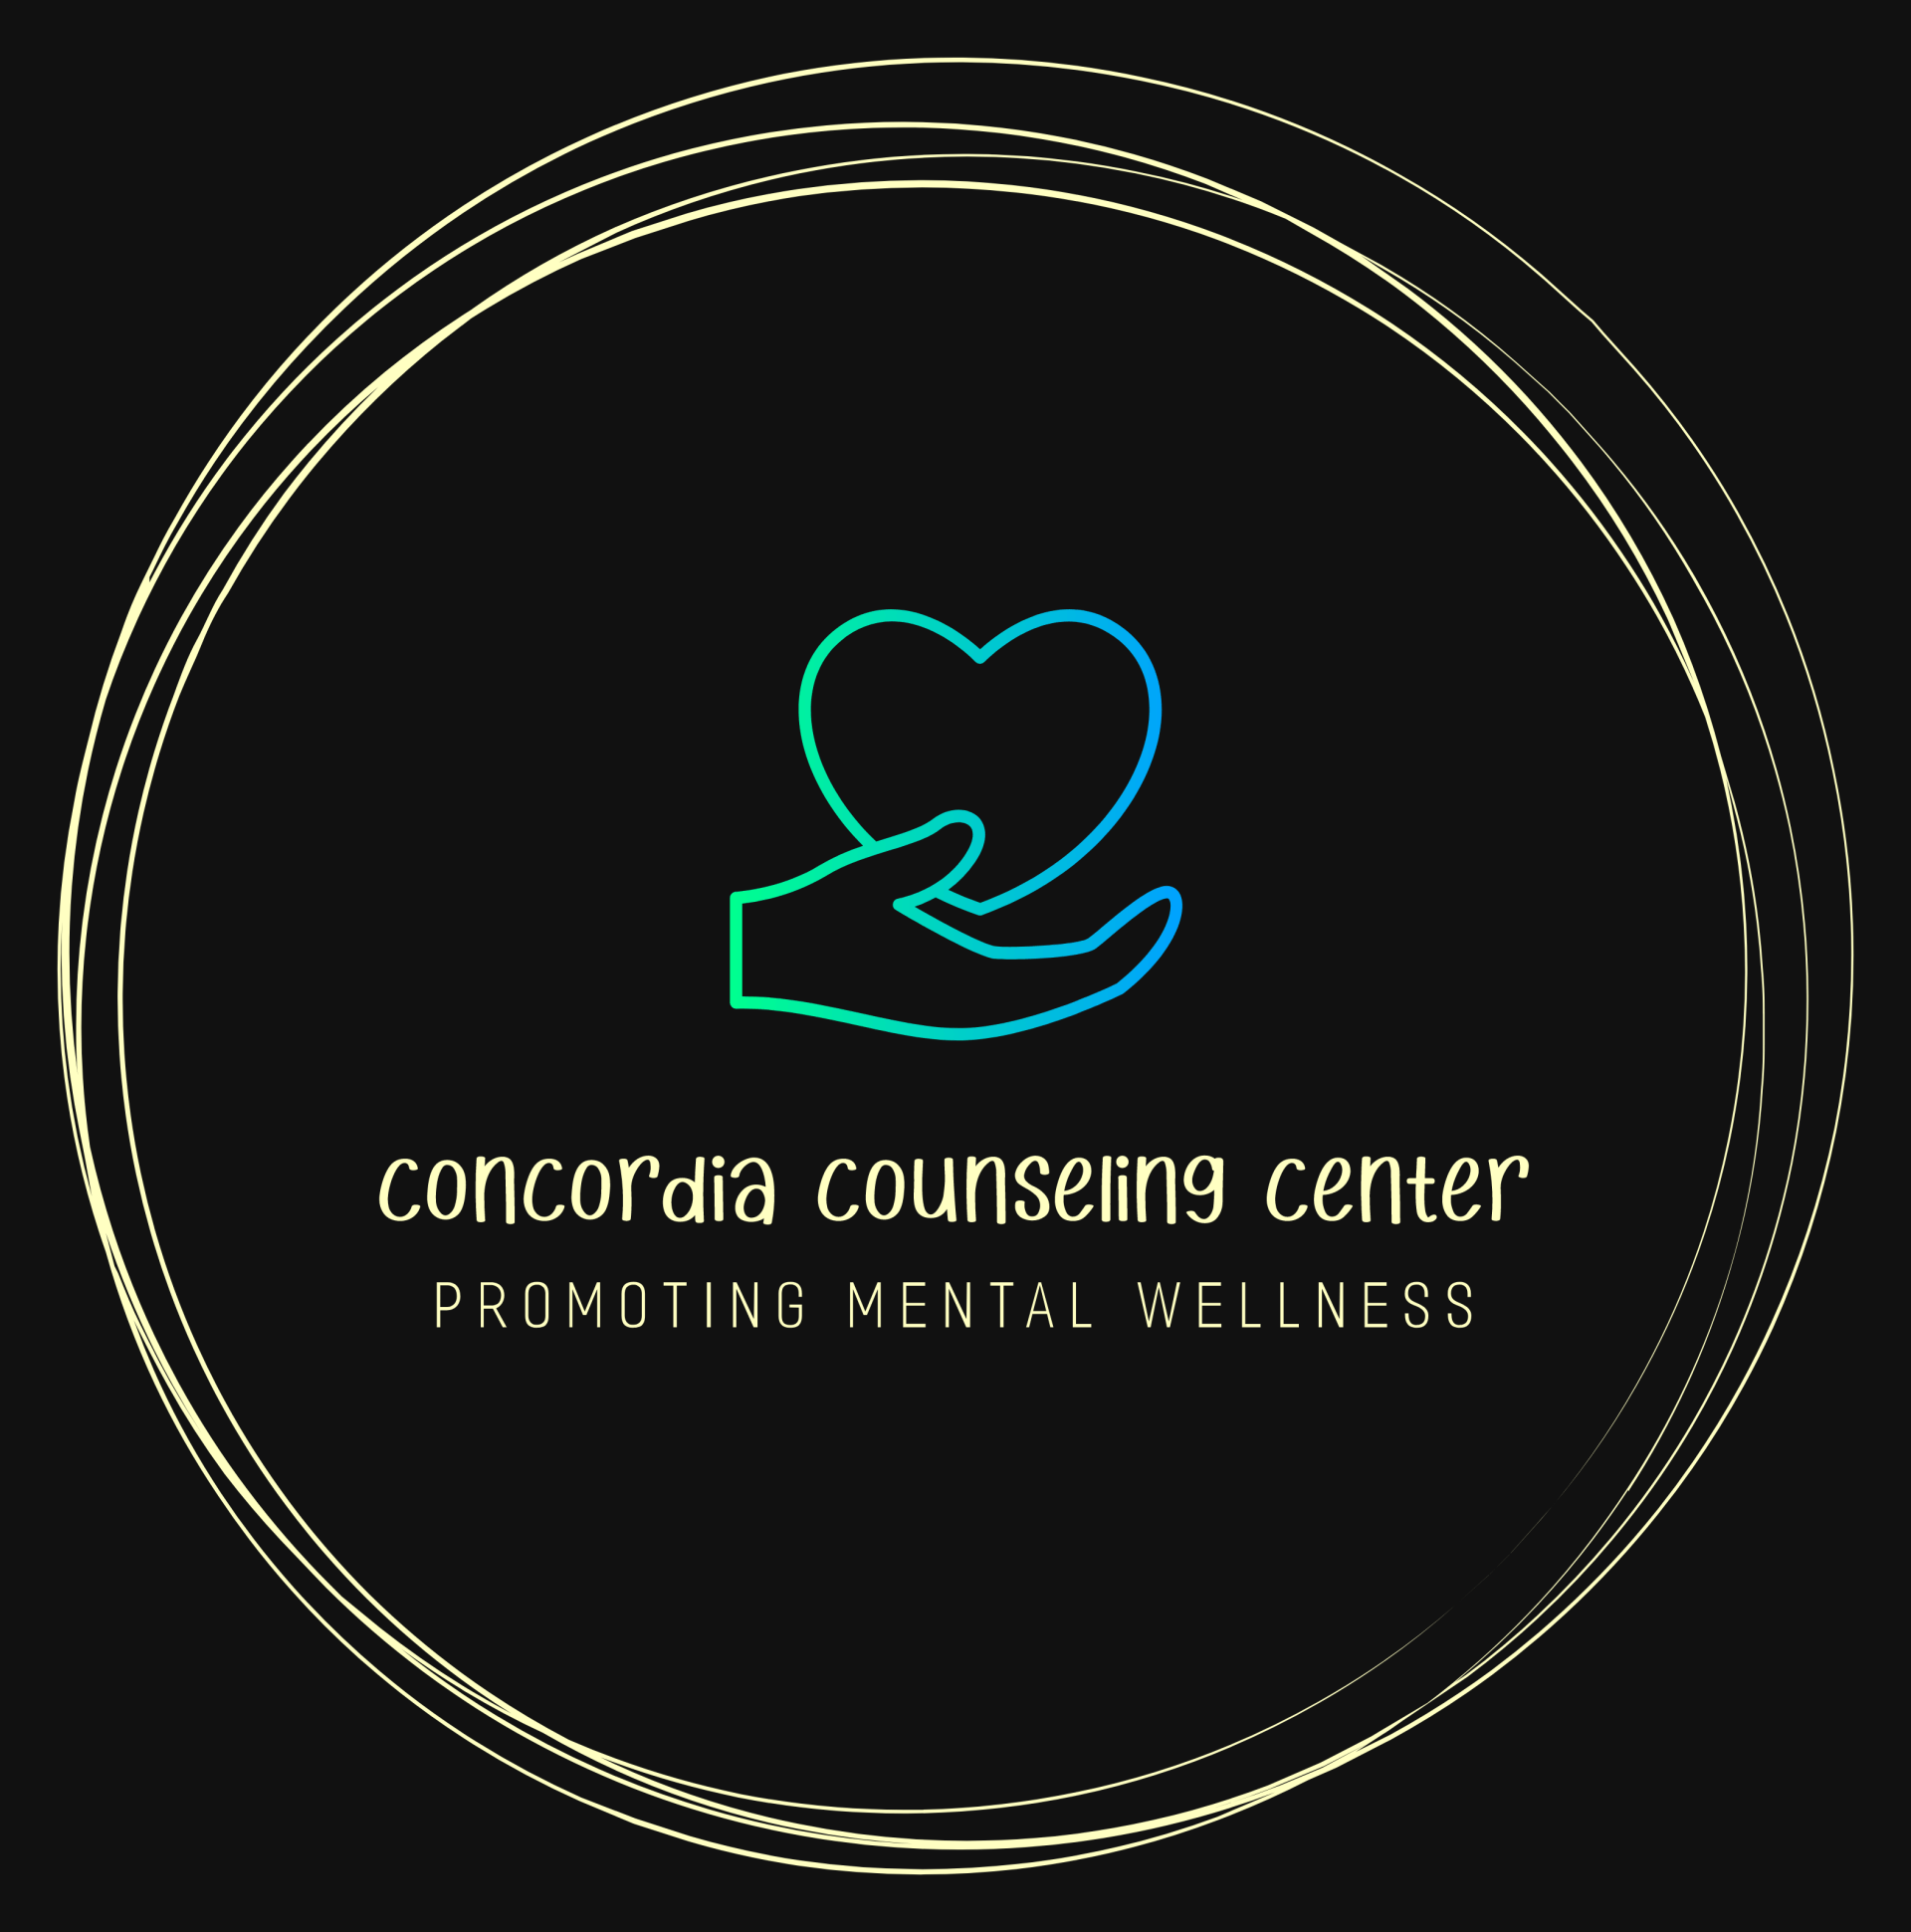 In black there is a logo of a hand holding a heart. Below it says Concordia Counseling Center Promoting Mental Wellness. Around are circular black outlines.